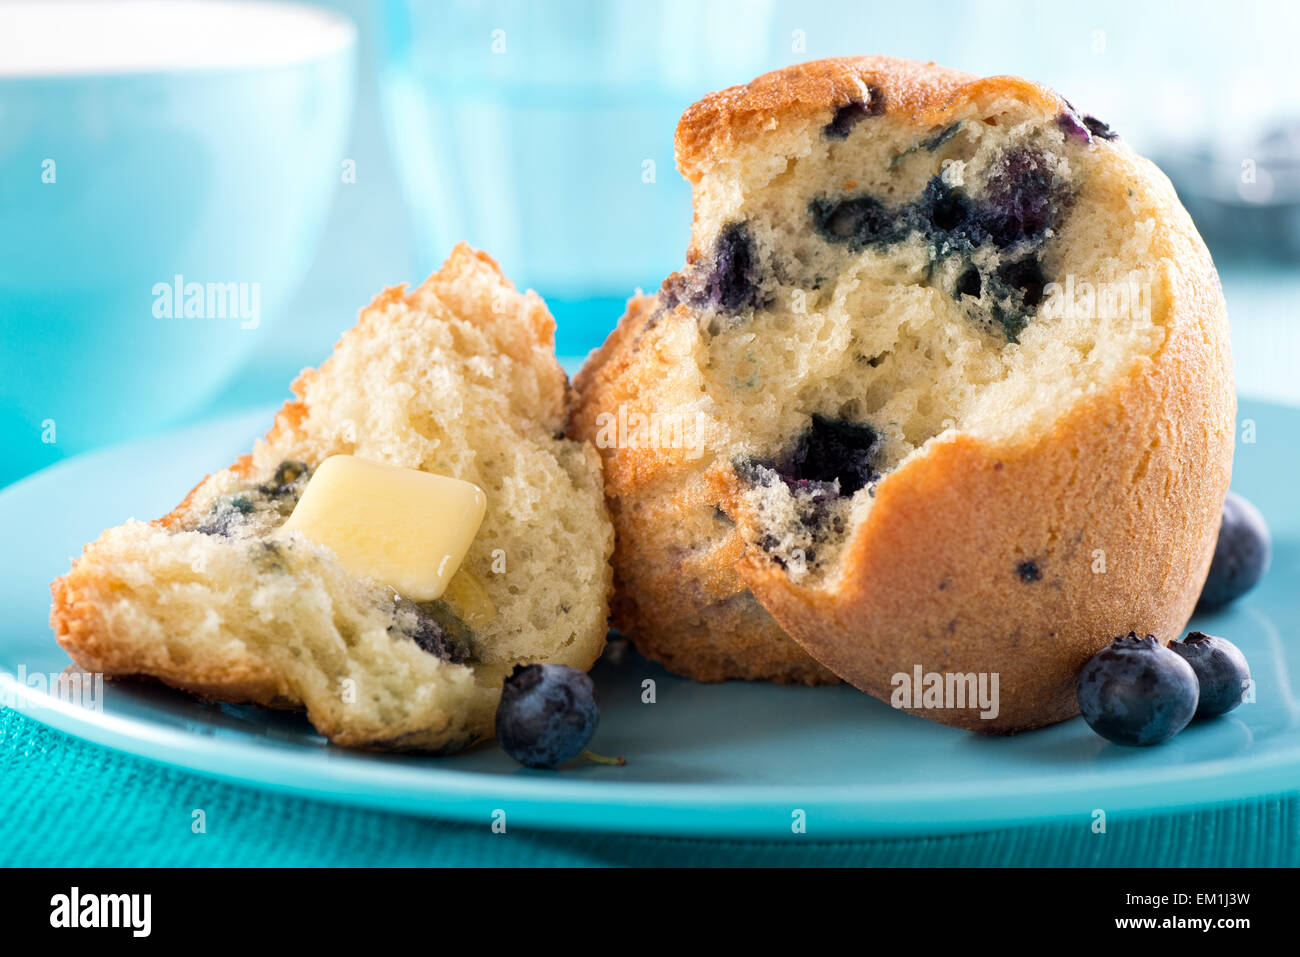 A delicous freshly baked blueberry muffin with melted butter. Stock Photo